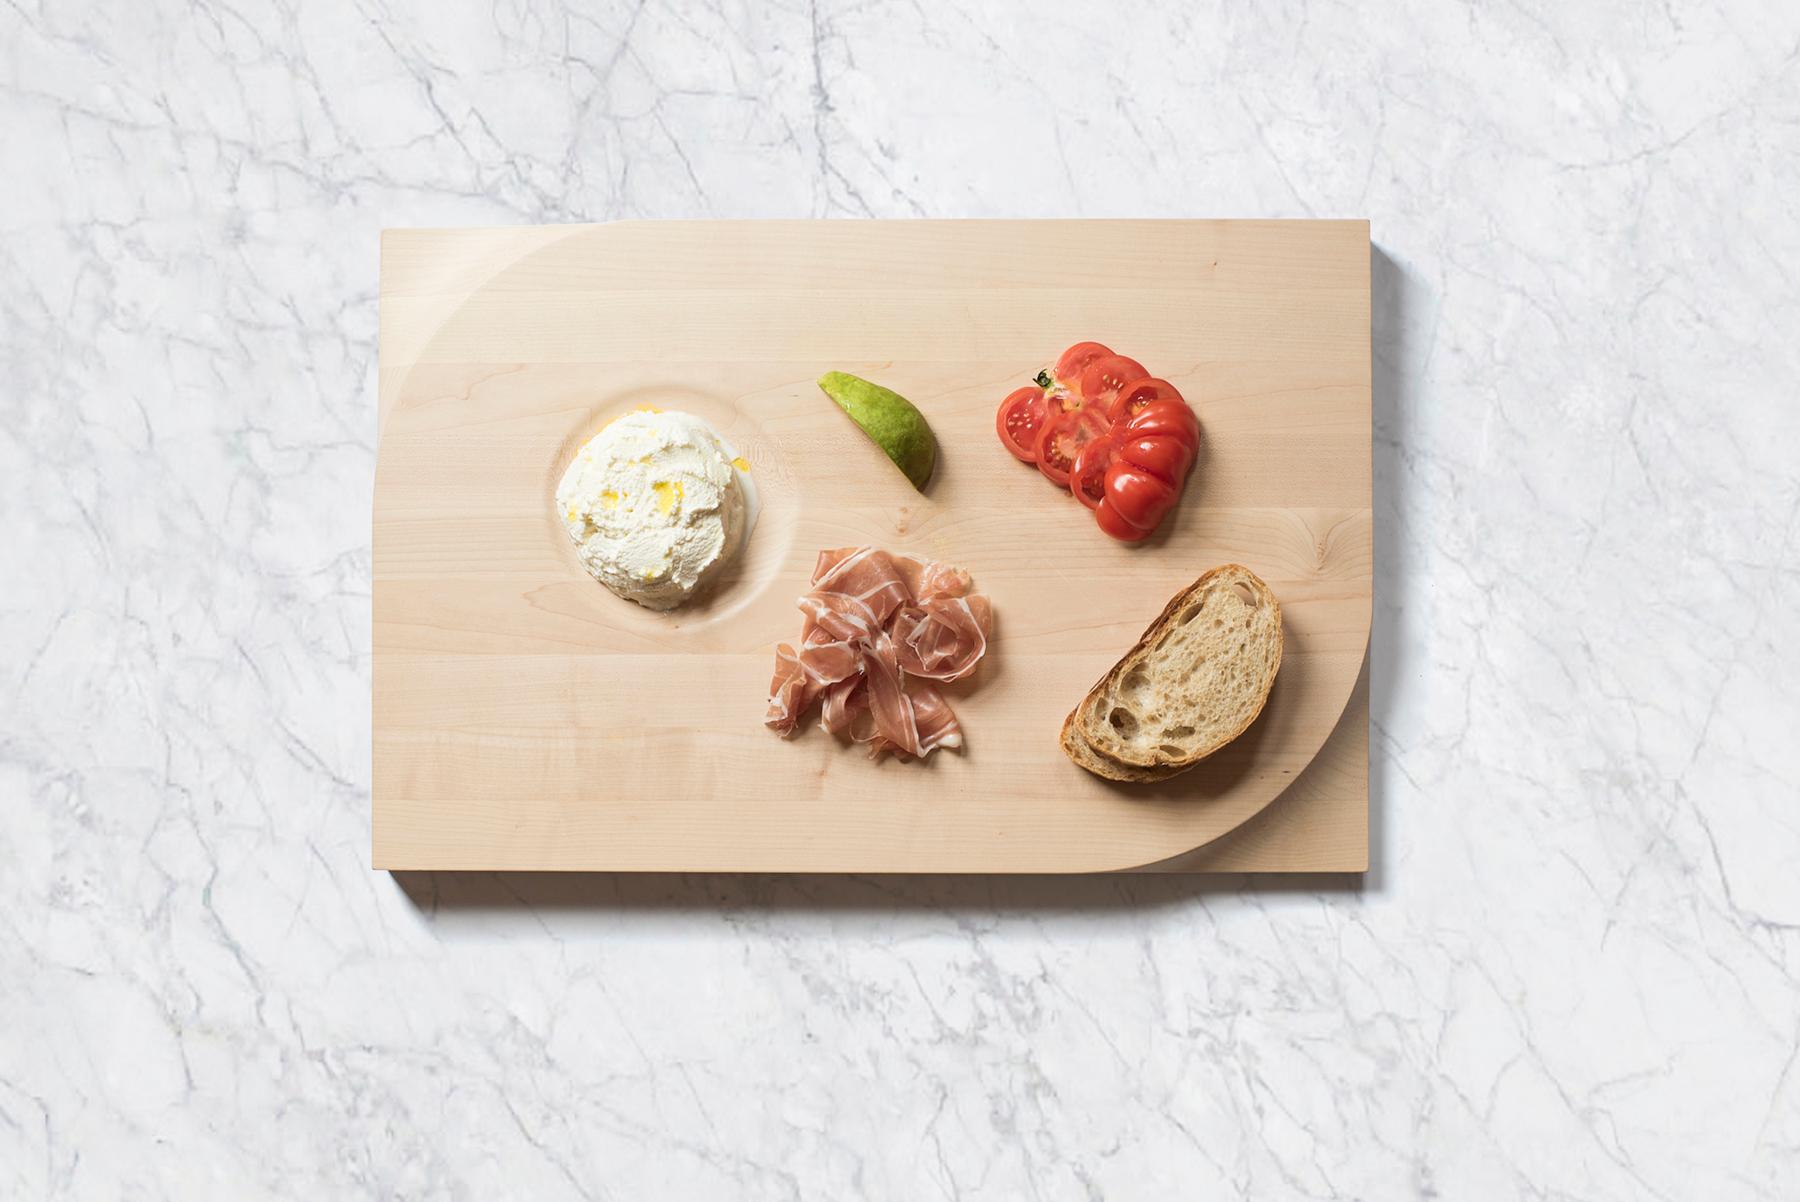 Beauty meets function. This two-sided cutting board is made with European maple butcher block and carved at the corners with an ergonomic shape for easy handling. It’s a dinner party staple accommodating your laborious food preparation on the broad,